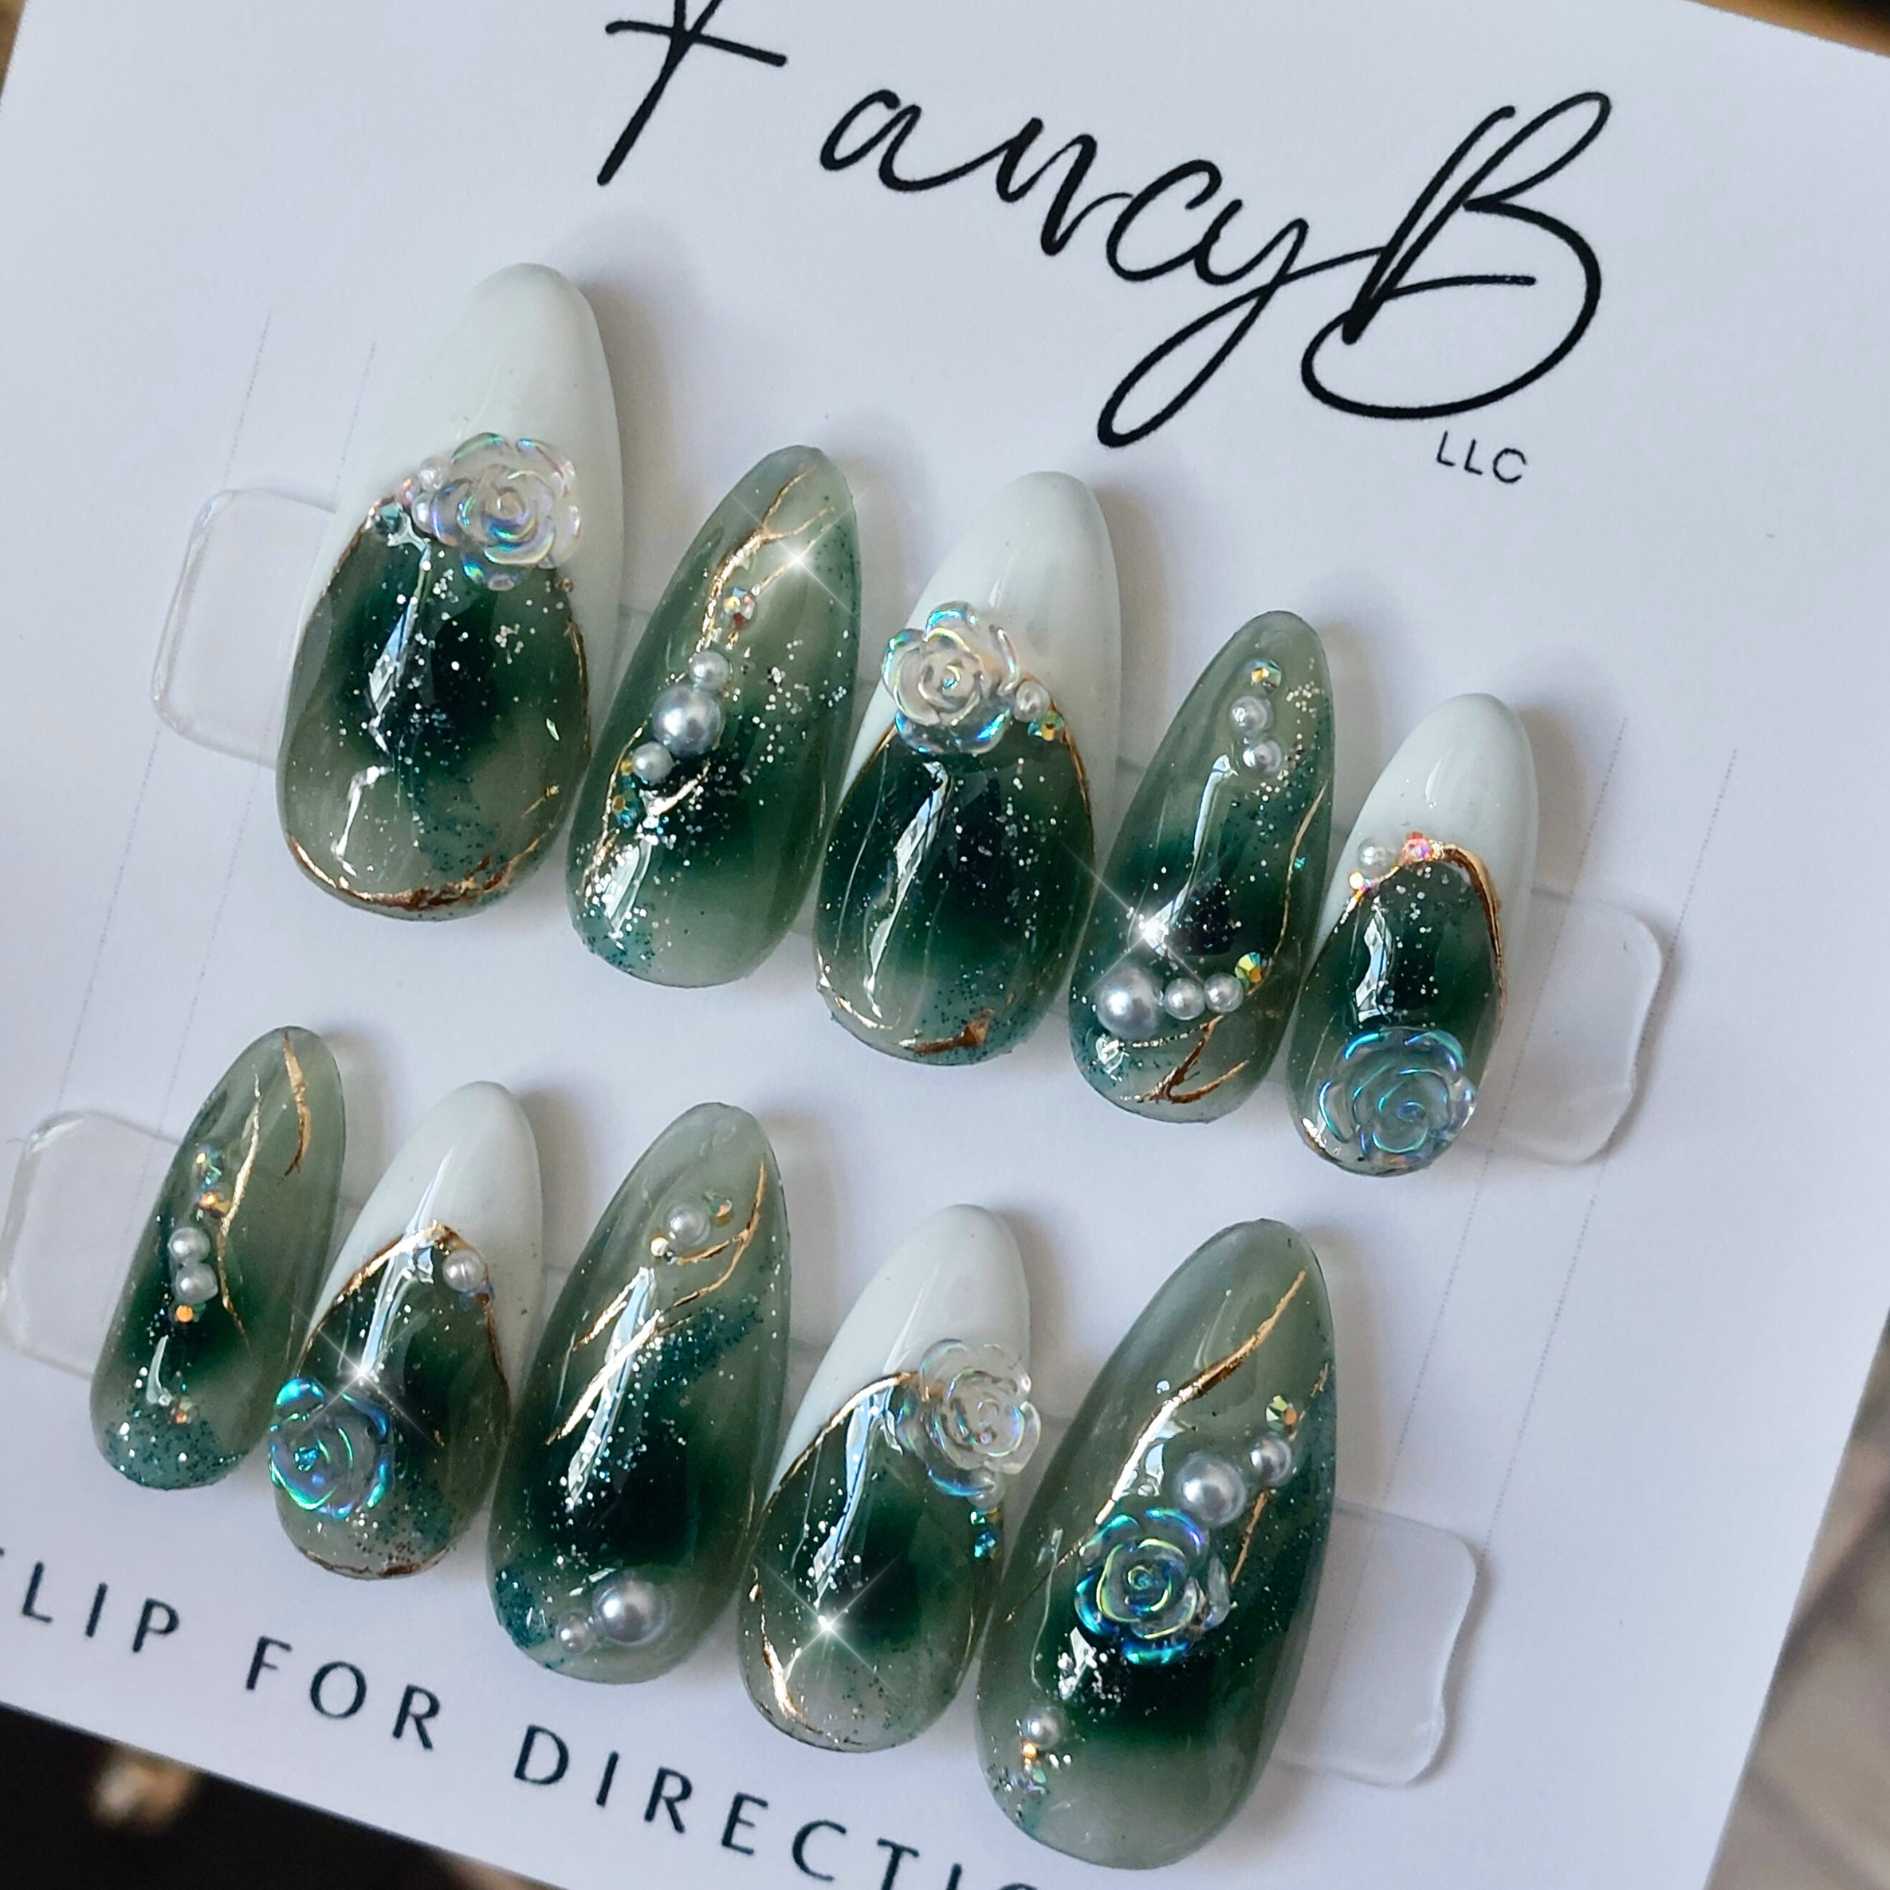 Custom emerald green press on nails, emerald green jelly nails with shimmer glitter, gold chrome lines, 3d crystal florals, flowers and pearls on a long almond shape by FancyB Nails.